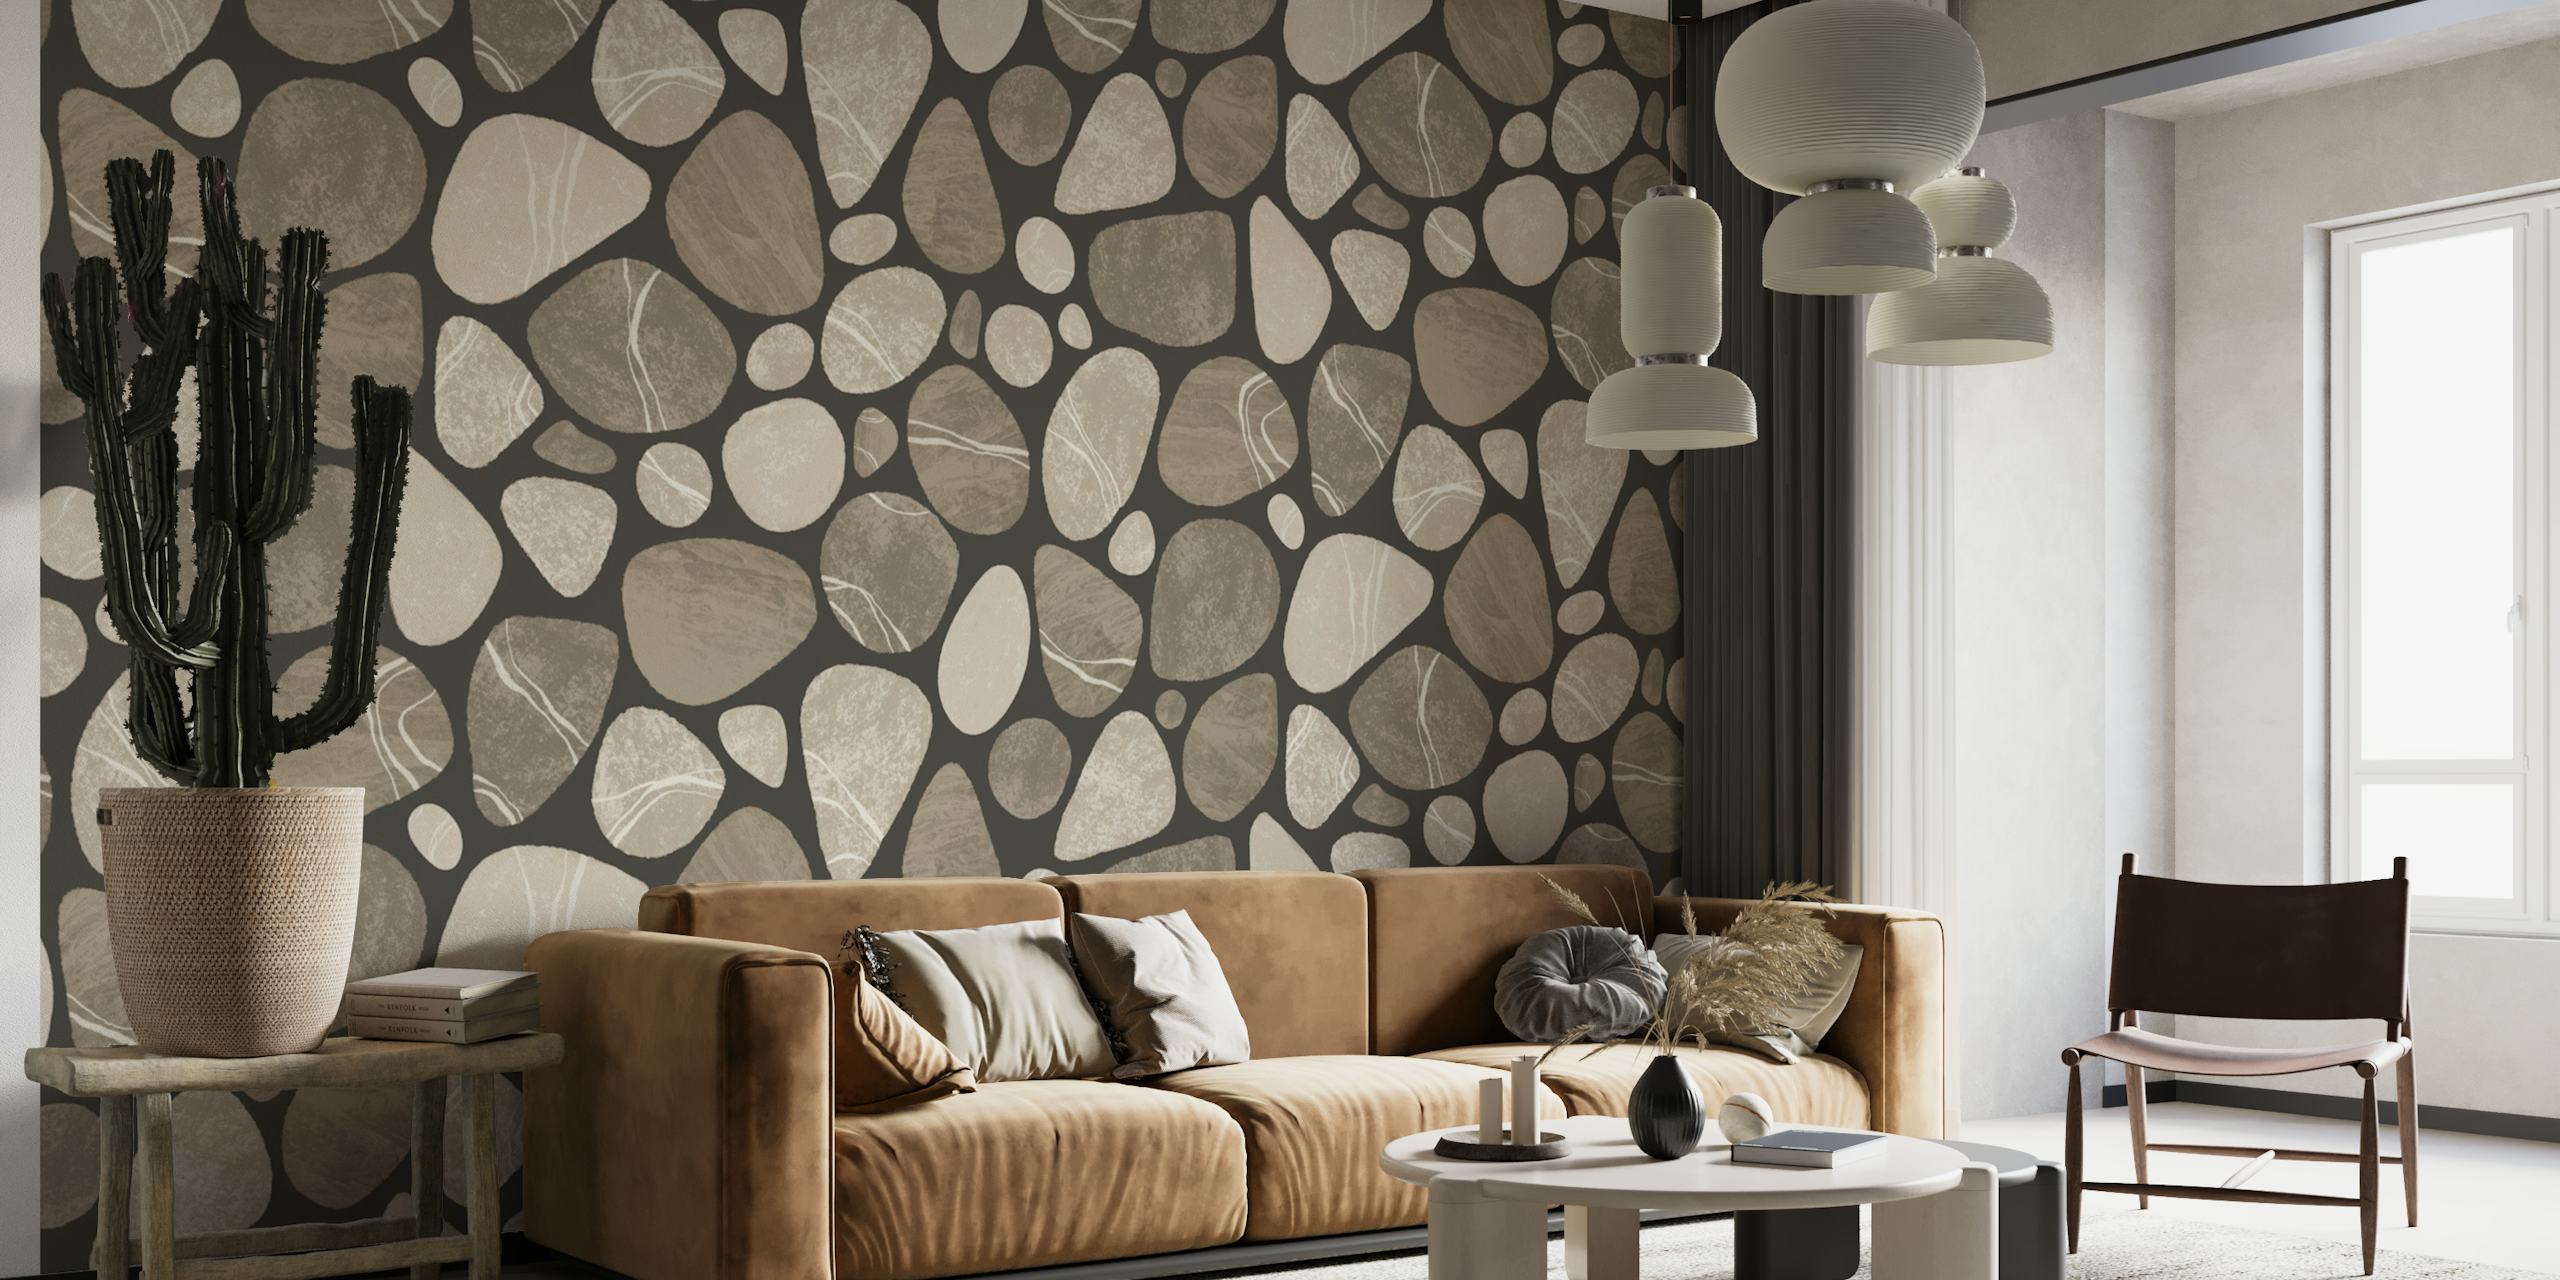 Pebble Serenity Stone Pattern Beauty Of Nature In Neutral Brown Beige Colors papel pintado